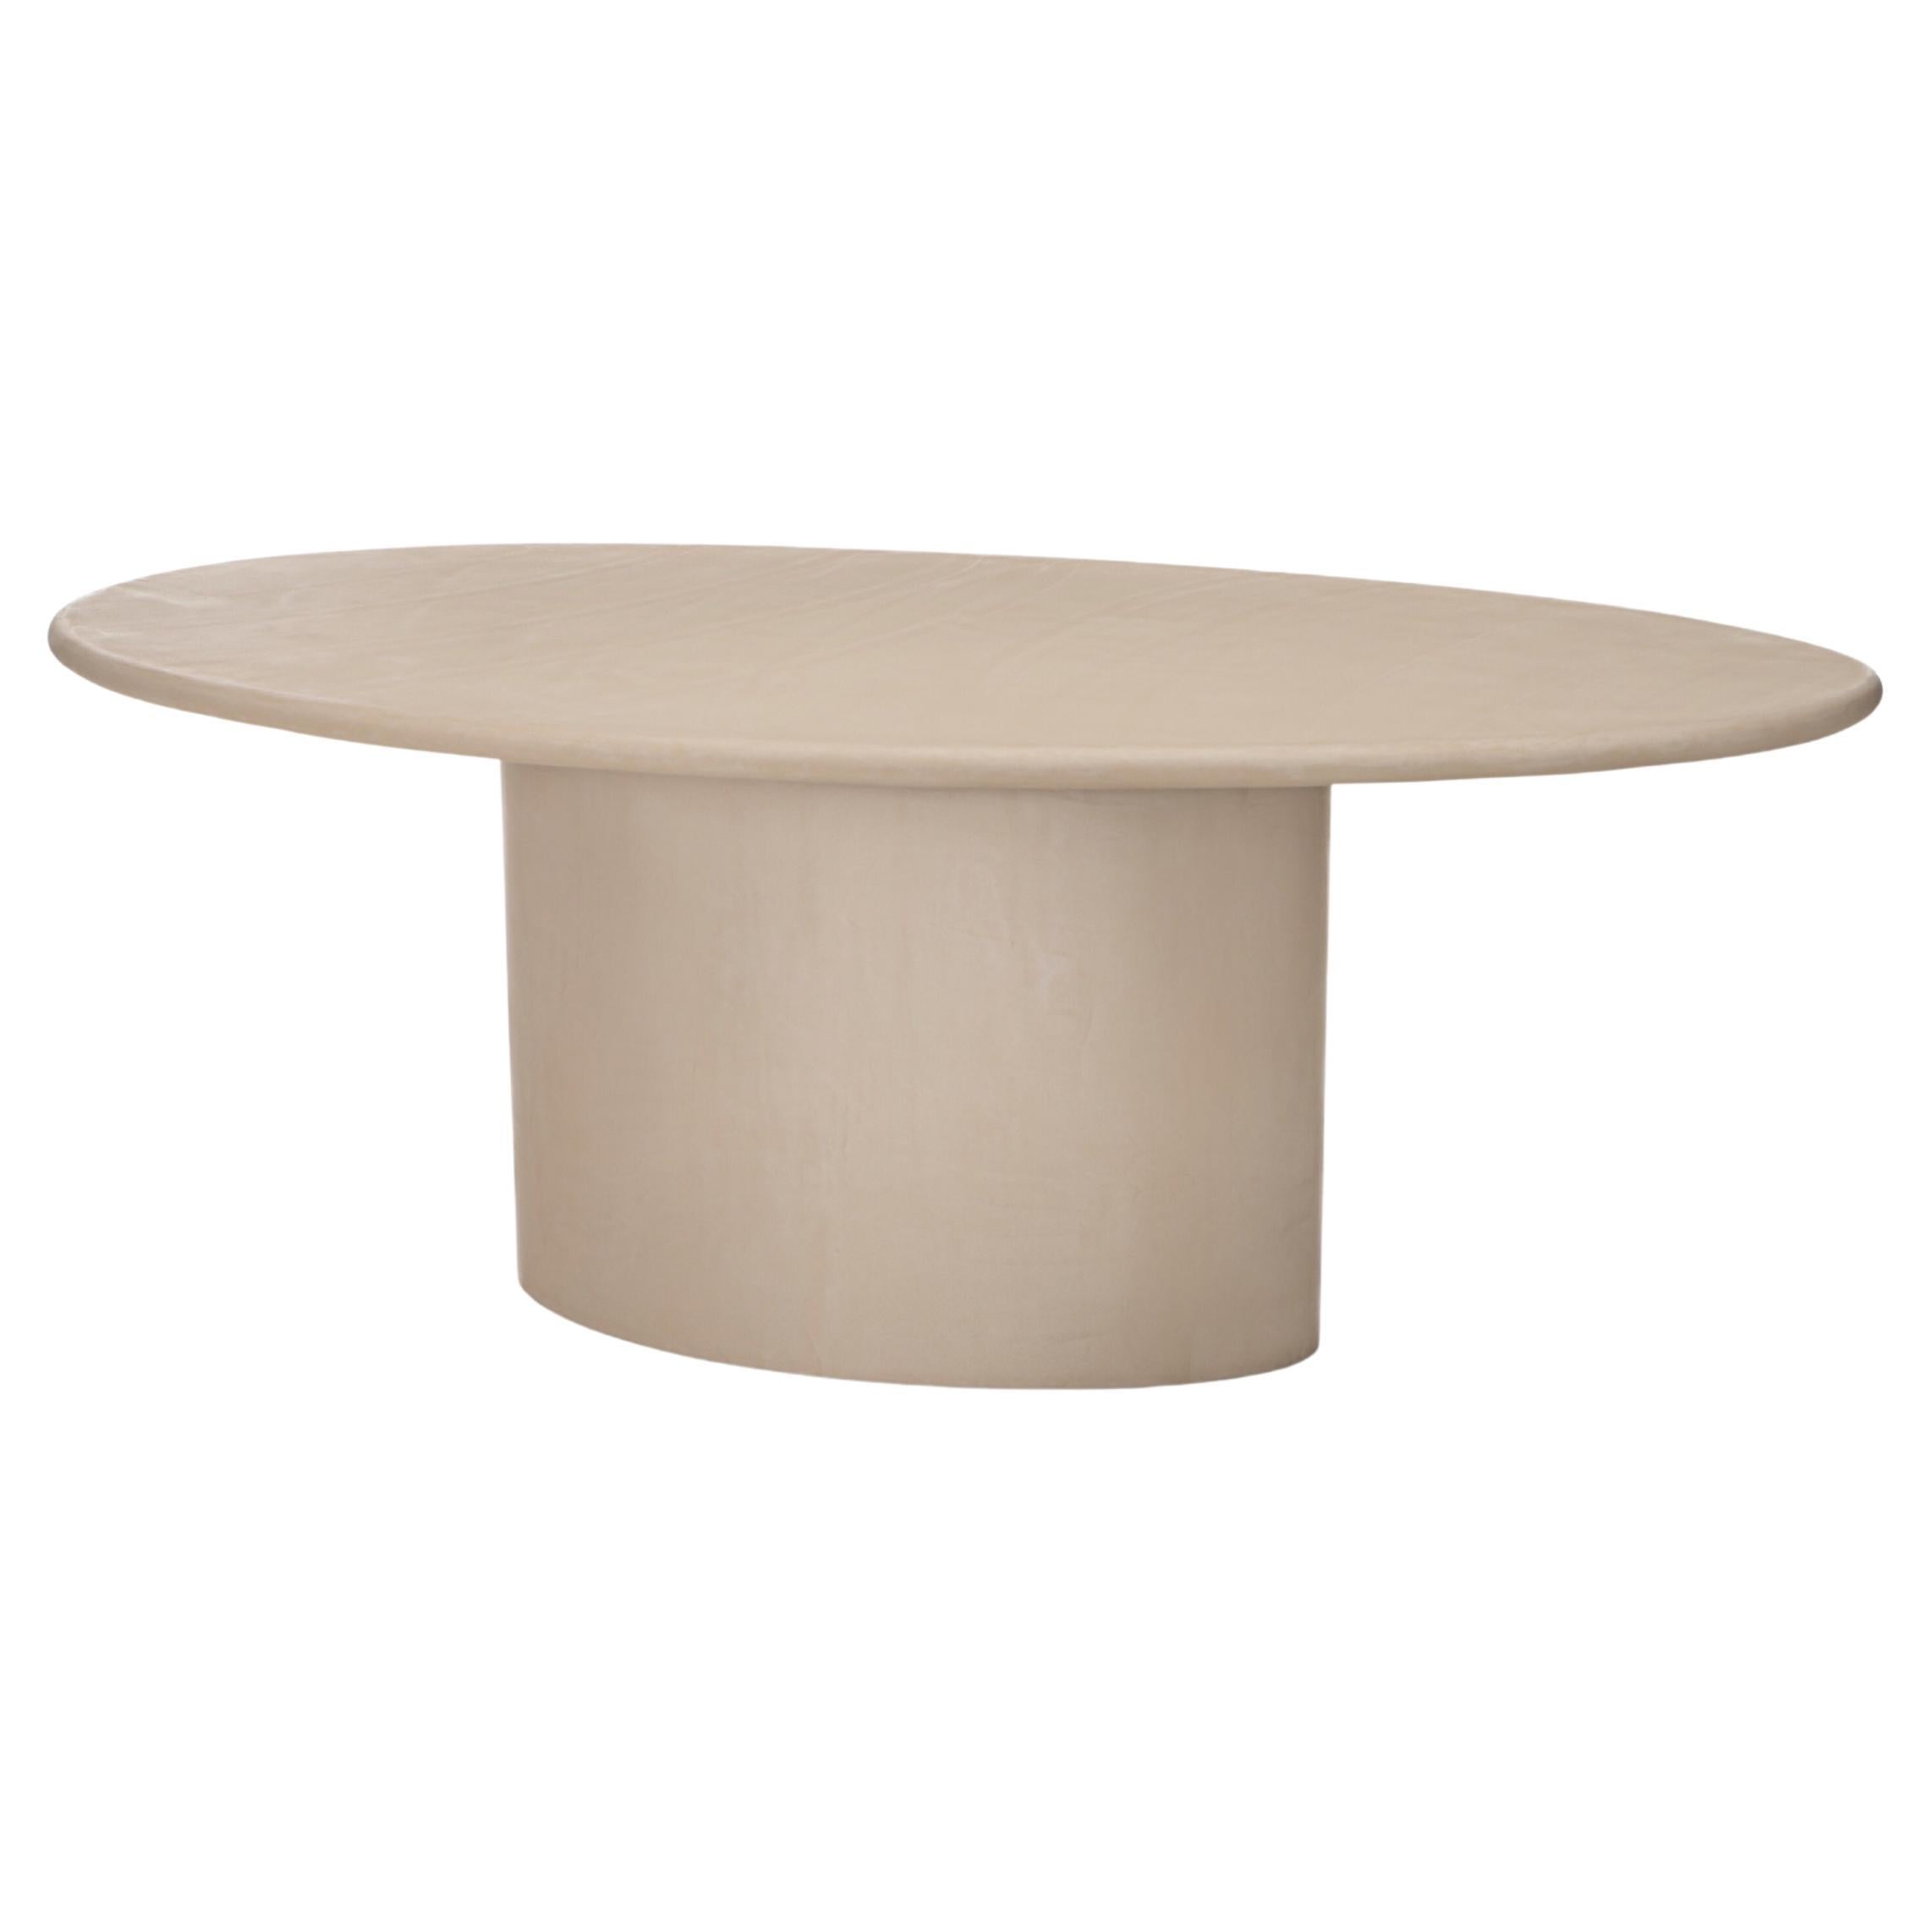 Organic Shaped Natural Plaster Dining Table "Sami" 200 by Isabelle Beaumont